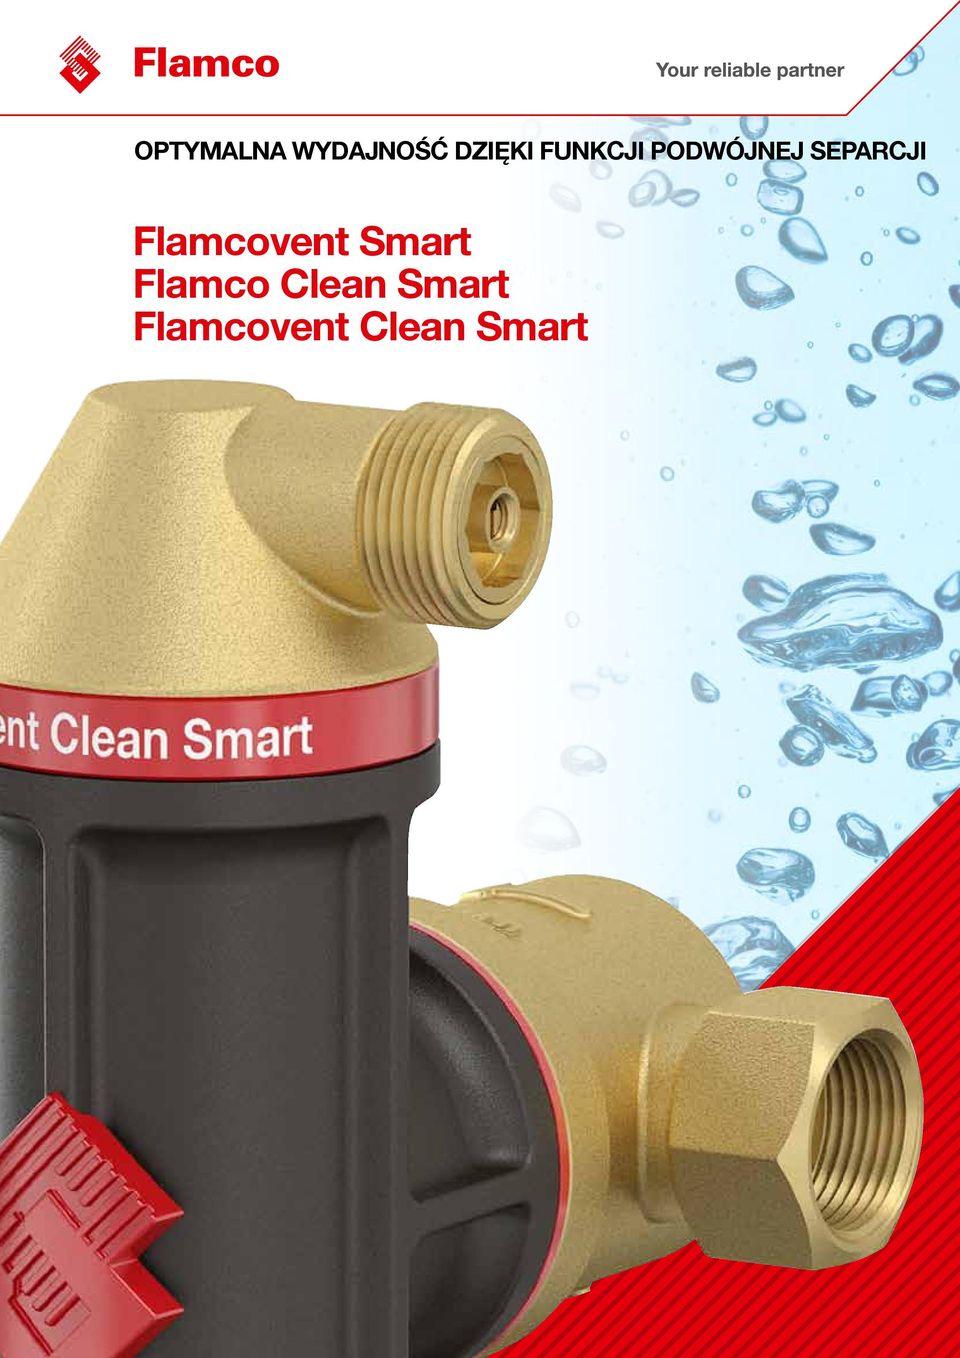 Flamcovent Smart Flamco